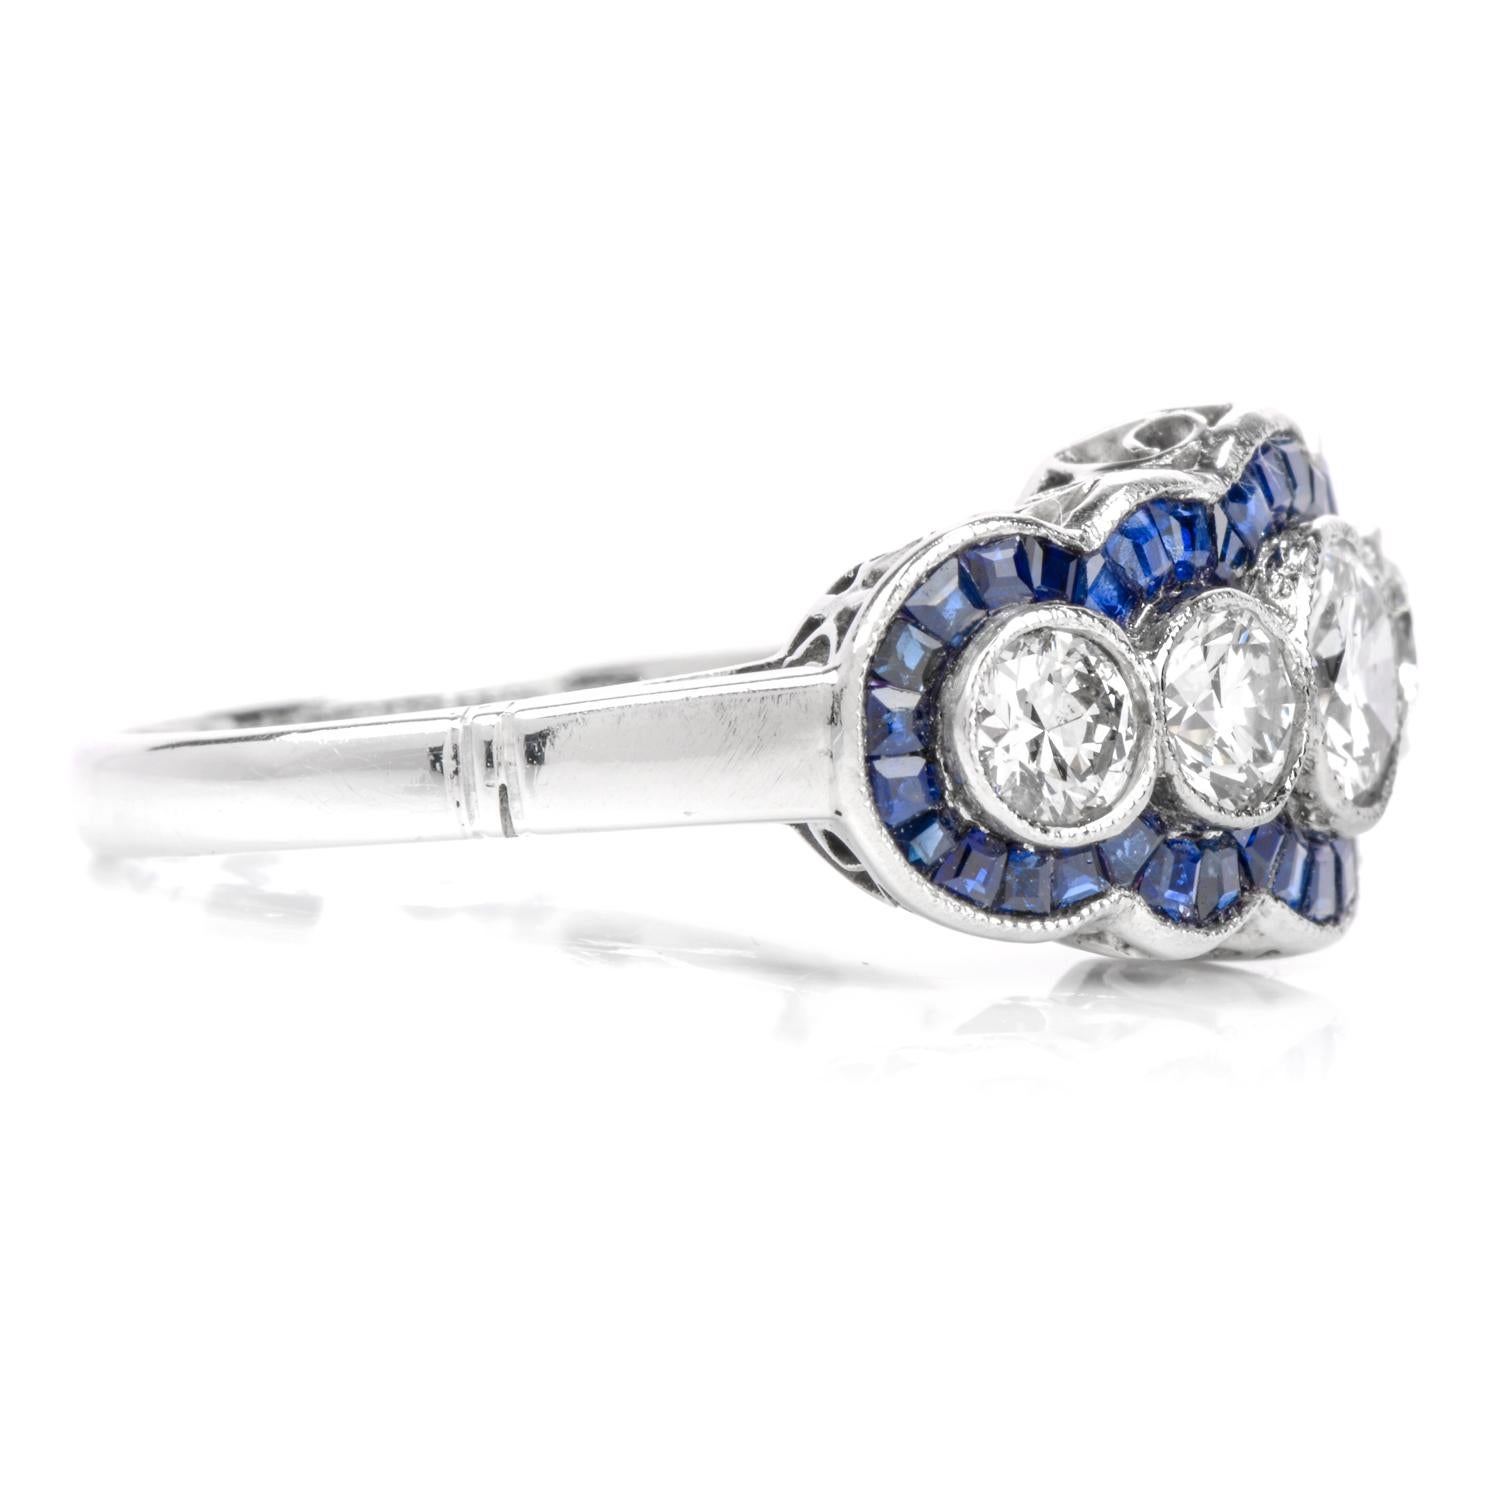 A twist to a classic anniversary band.

This band features 5 round brilliant cut diamonds through the center of the the ring while a scalloping halo of French cut, deep blue Sapphire surround.

Cast in Platinum, this ring measures appx. 9.94 x